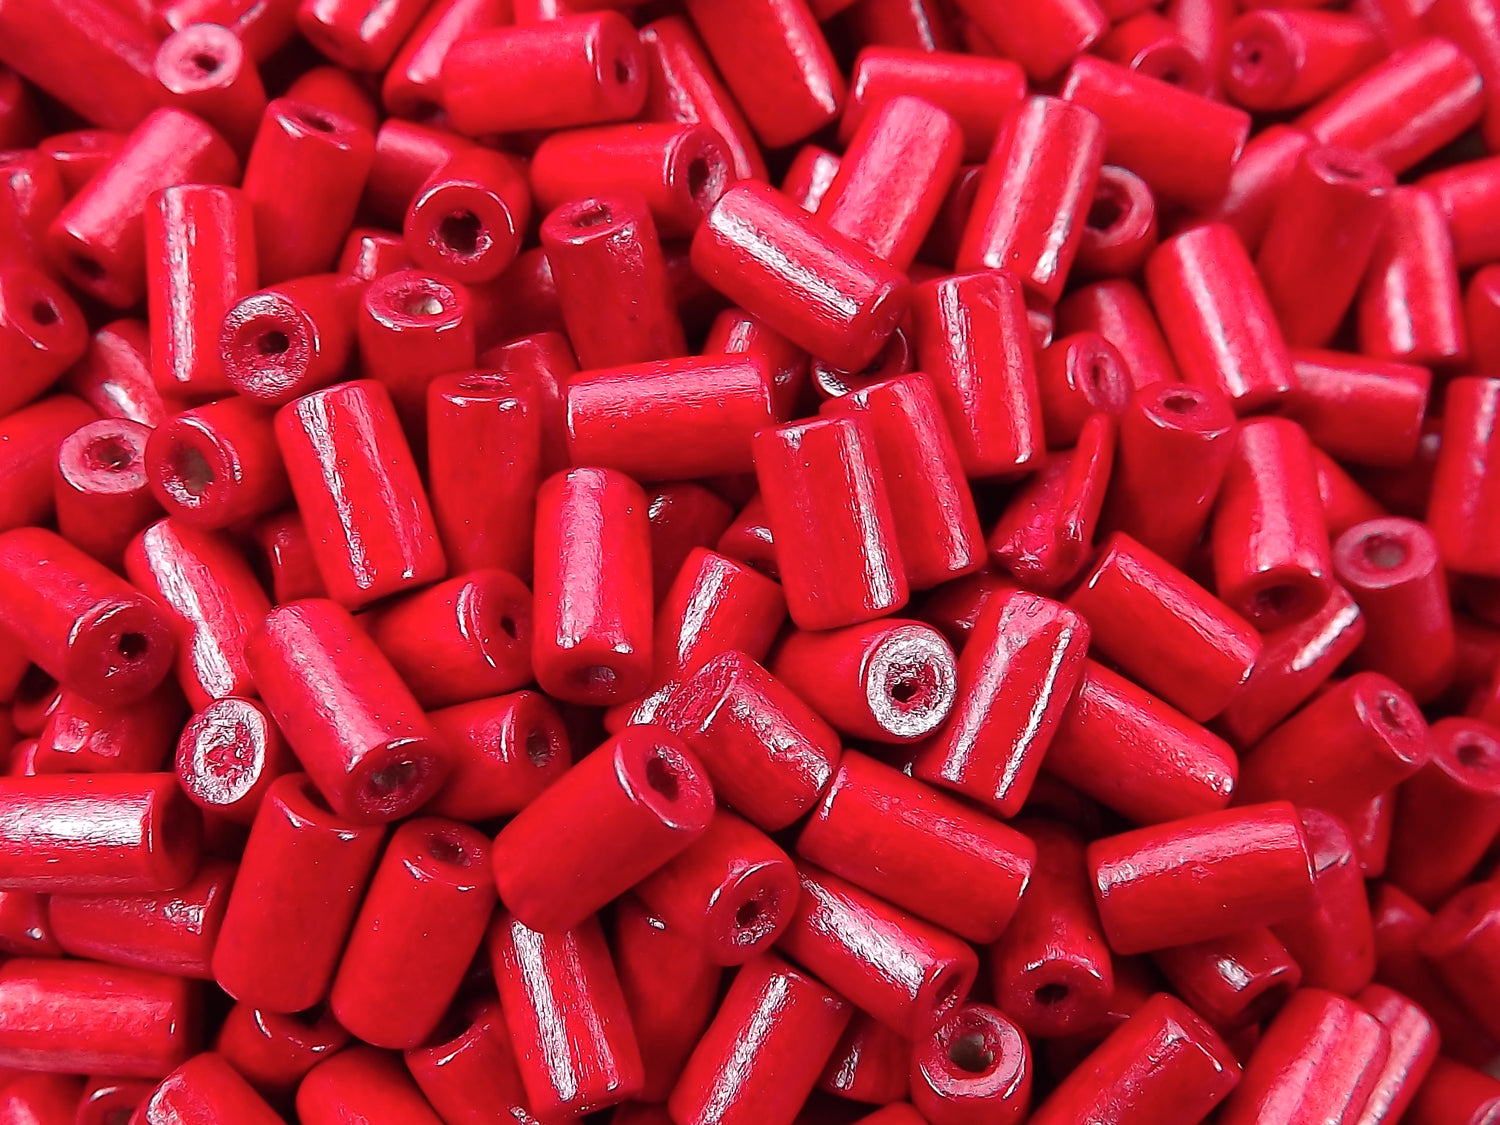 Poppy Red Wood Tube Beads Satin Varnished Plain Simple Round Smooth Ball Wooden Bead Spacers 8mm Choose 50pcs, 200pcs or 400pcs